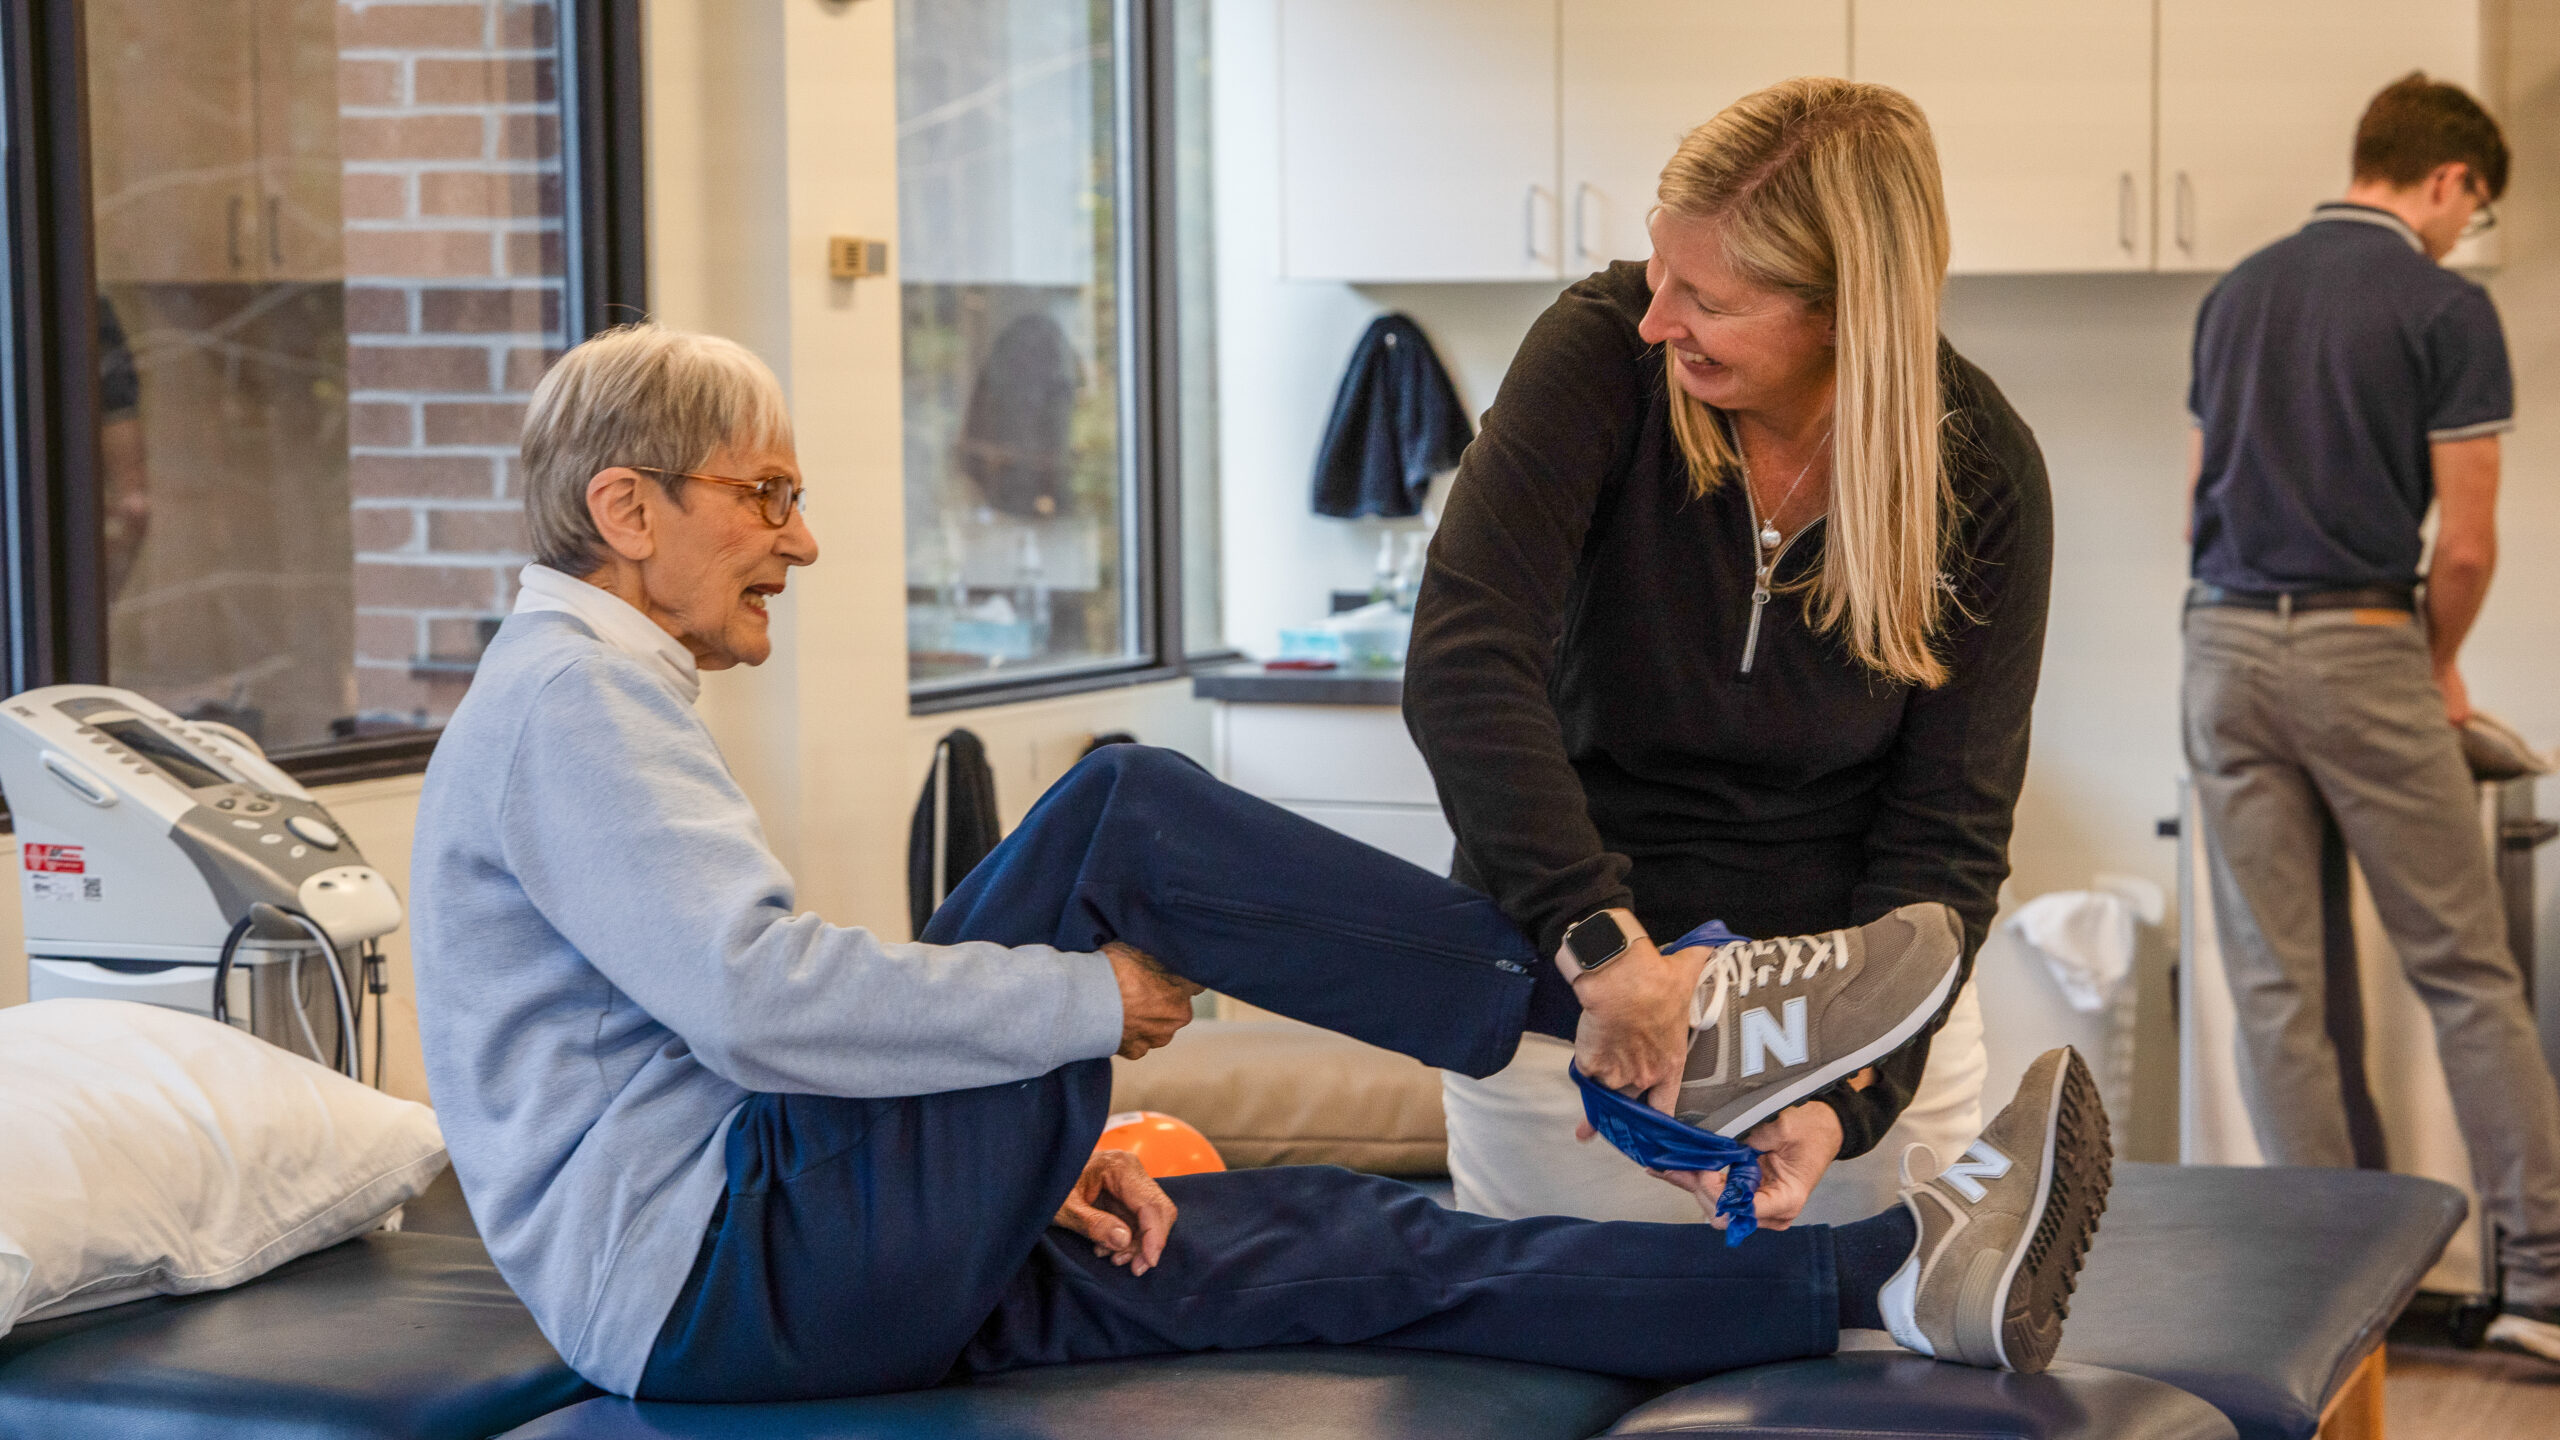 Physical Therapy & Sports Medicine Centers (PTSMC) of Avon physical therapist treating female patient's foot on treatment table